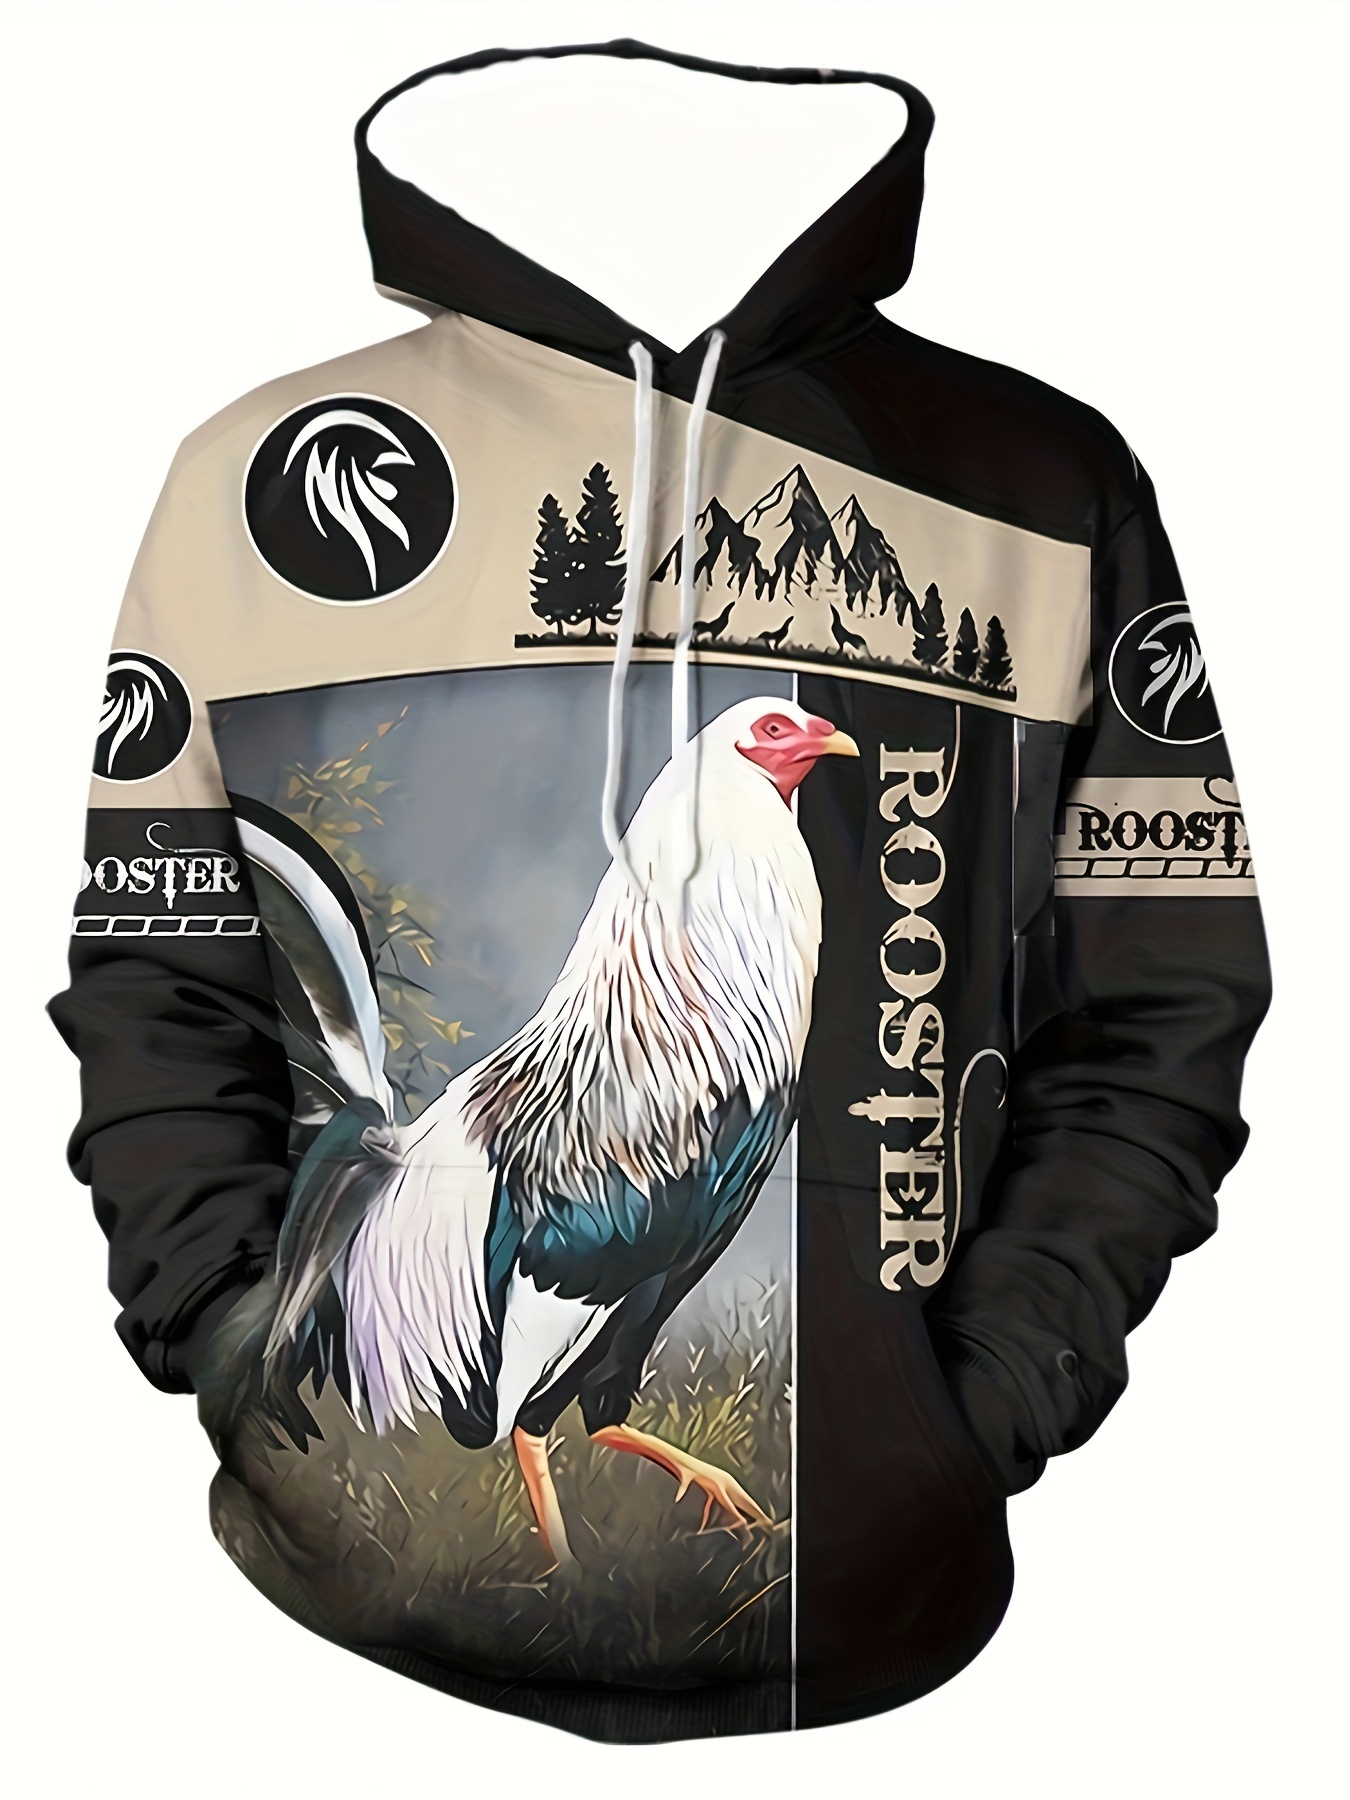 Rooster Print Hoodie, Cool Hoodies For Men, Men’s Casual Graphic Design Hooded Sweatshirt Streetwear For Winter Fall, As Gifts